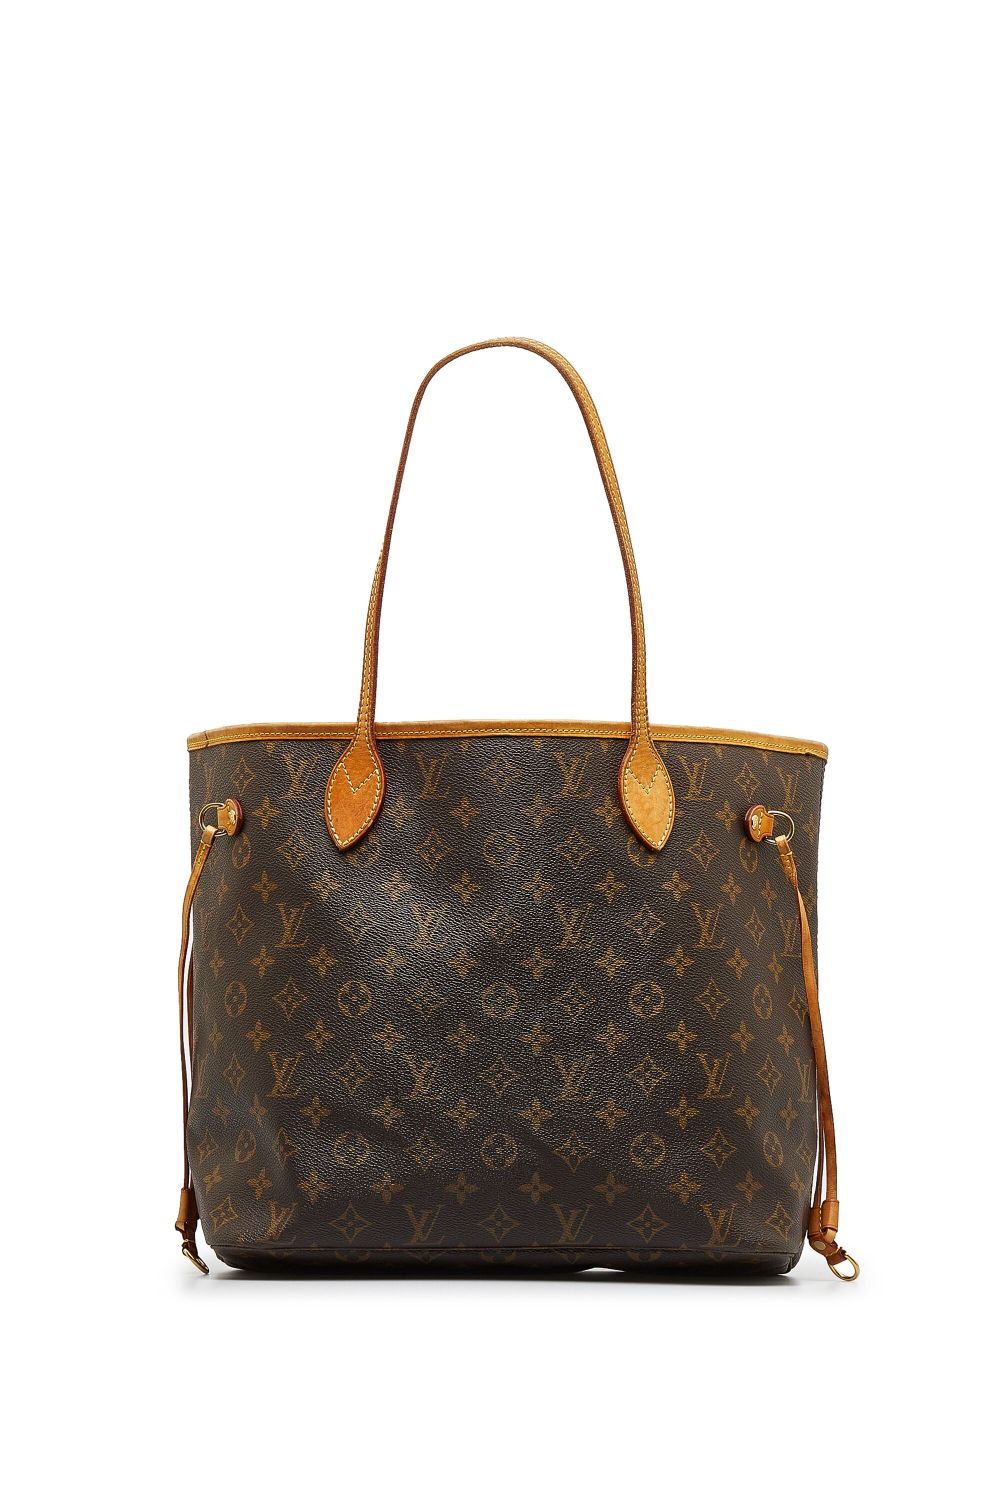 Pre-owned Louis Vuitton 2009 Monogram Neverfull Mm Tote Bag In Brown